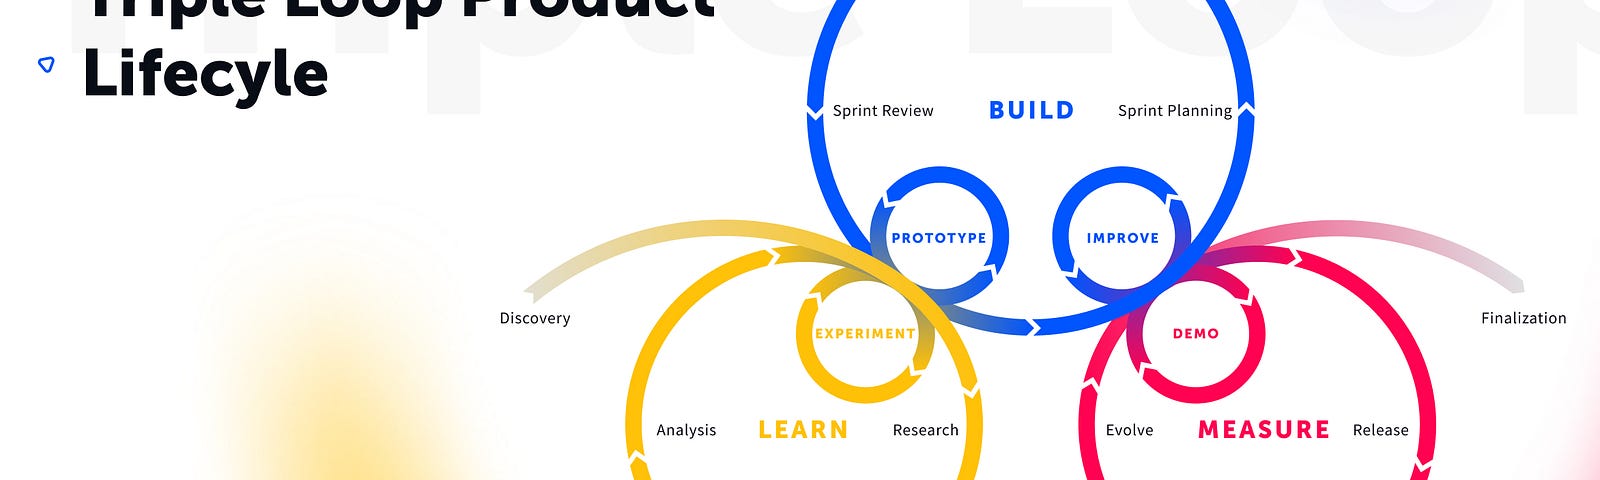 Triple Loop Product Lifecycle with Learn, Prototype, Experiment, Build, Demonstrate, Improve, Measure and Learn again Phases